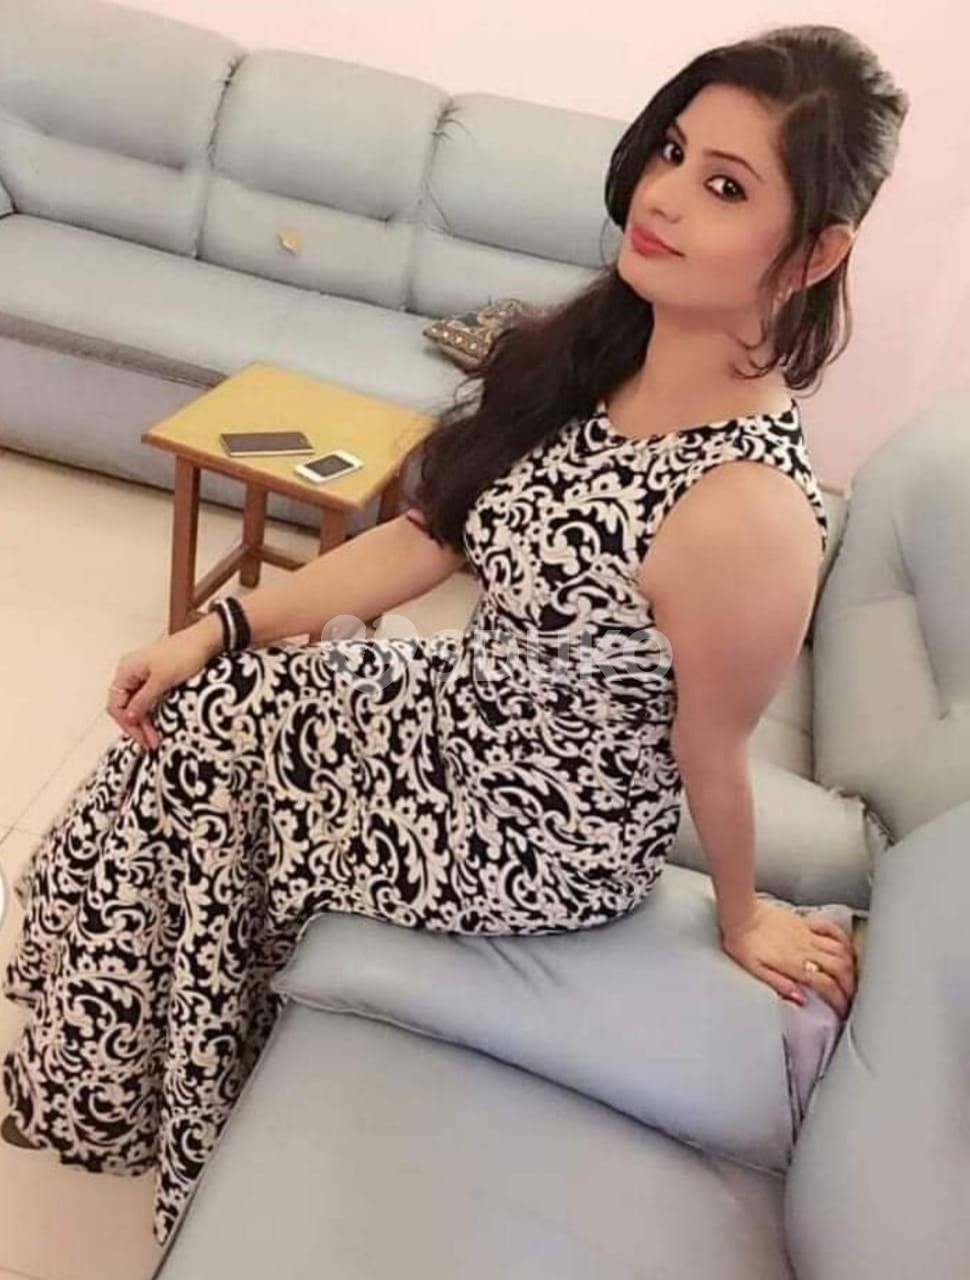 KURLA BEST 🙋‍♀️TODAY LOW COST HIGH PROFILE INDEPENDENT CALL GIRL SERVICE AVAILABLE 24 HOURS AVAILABLE HOME AND